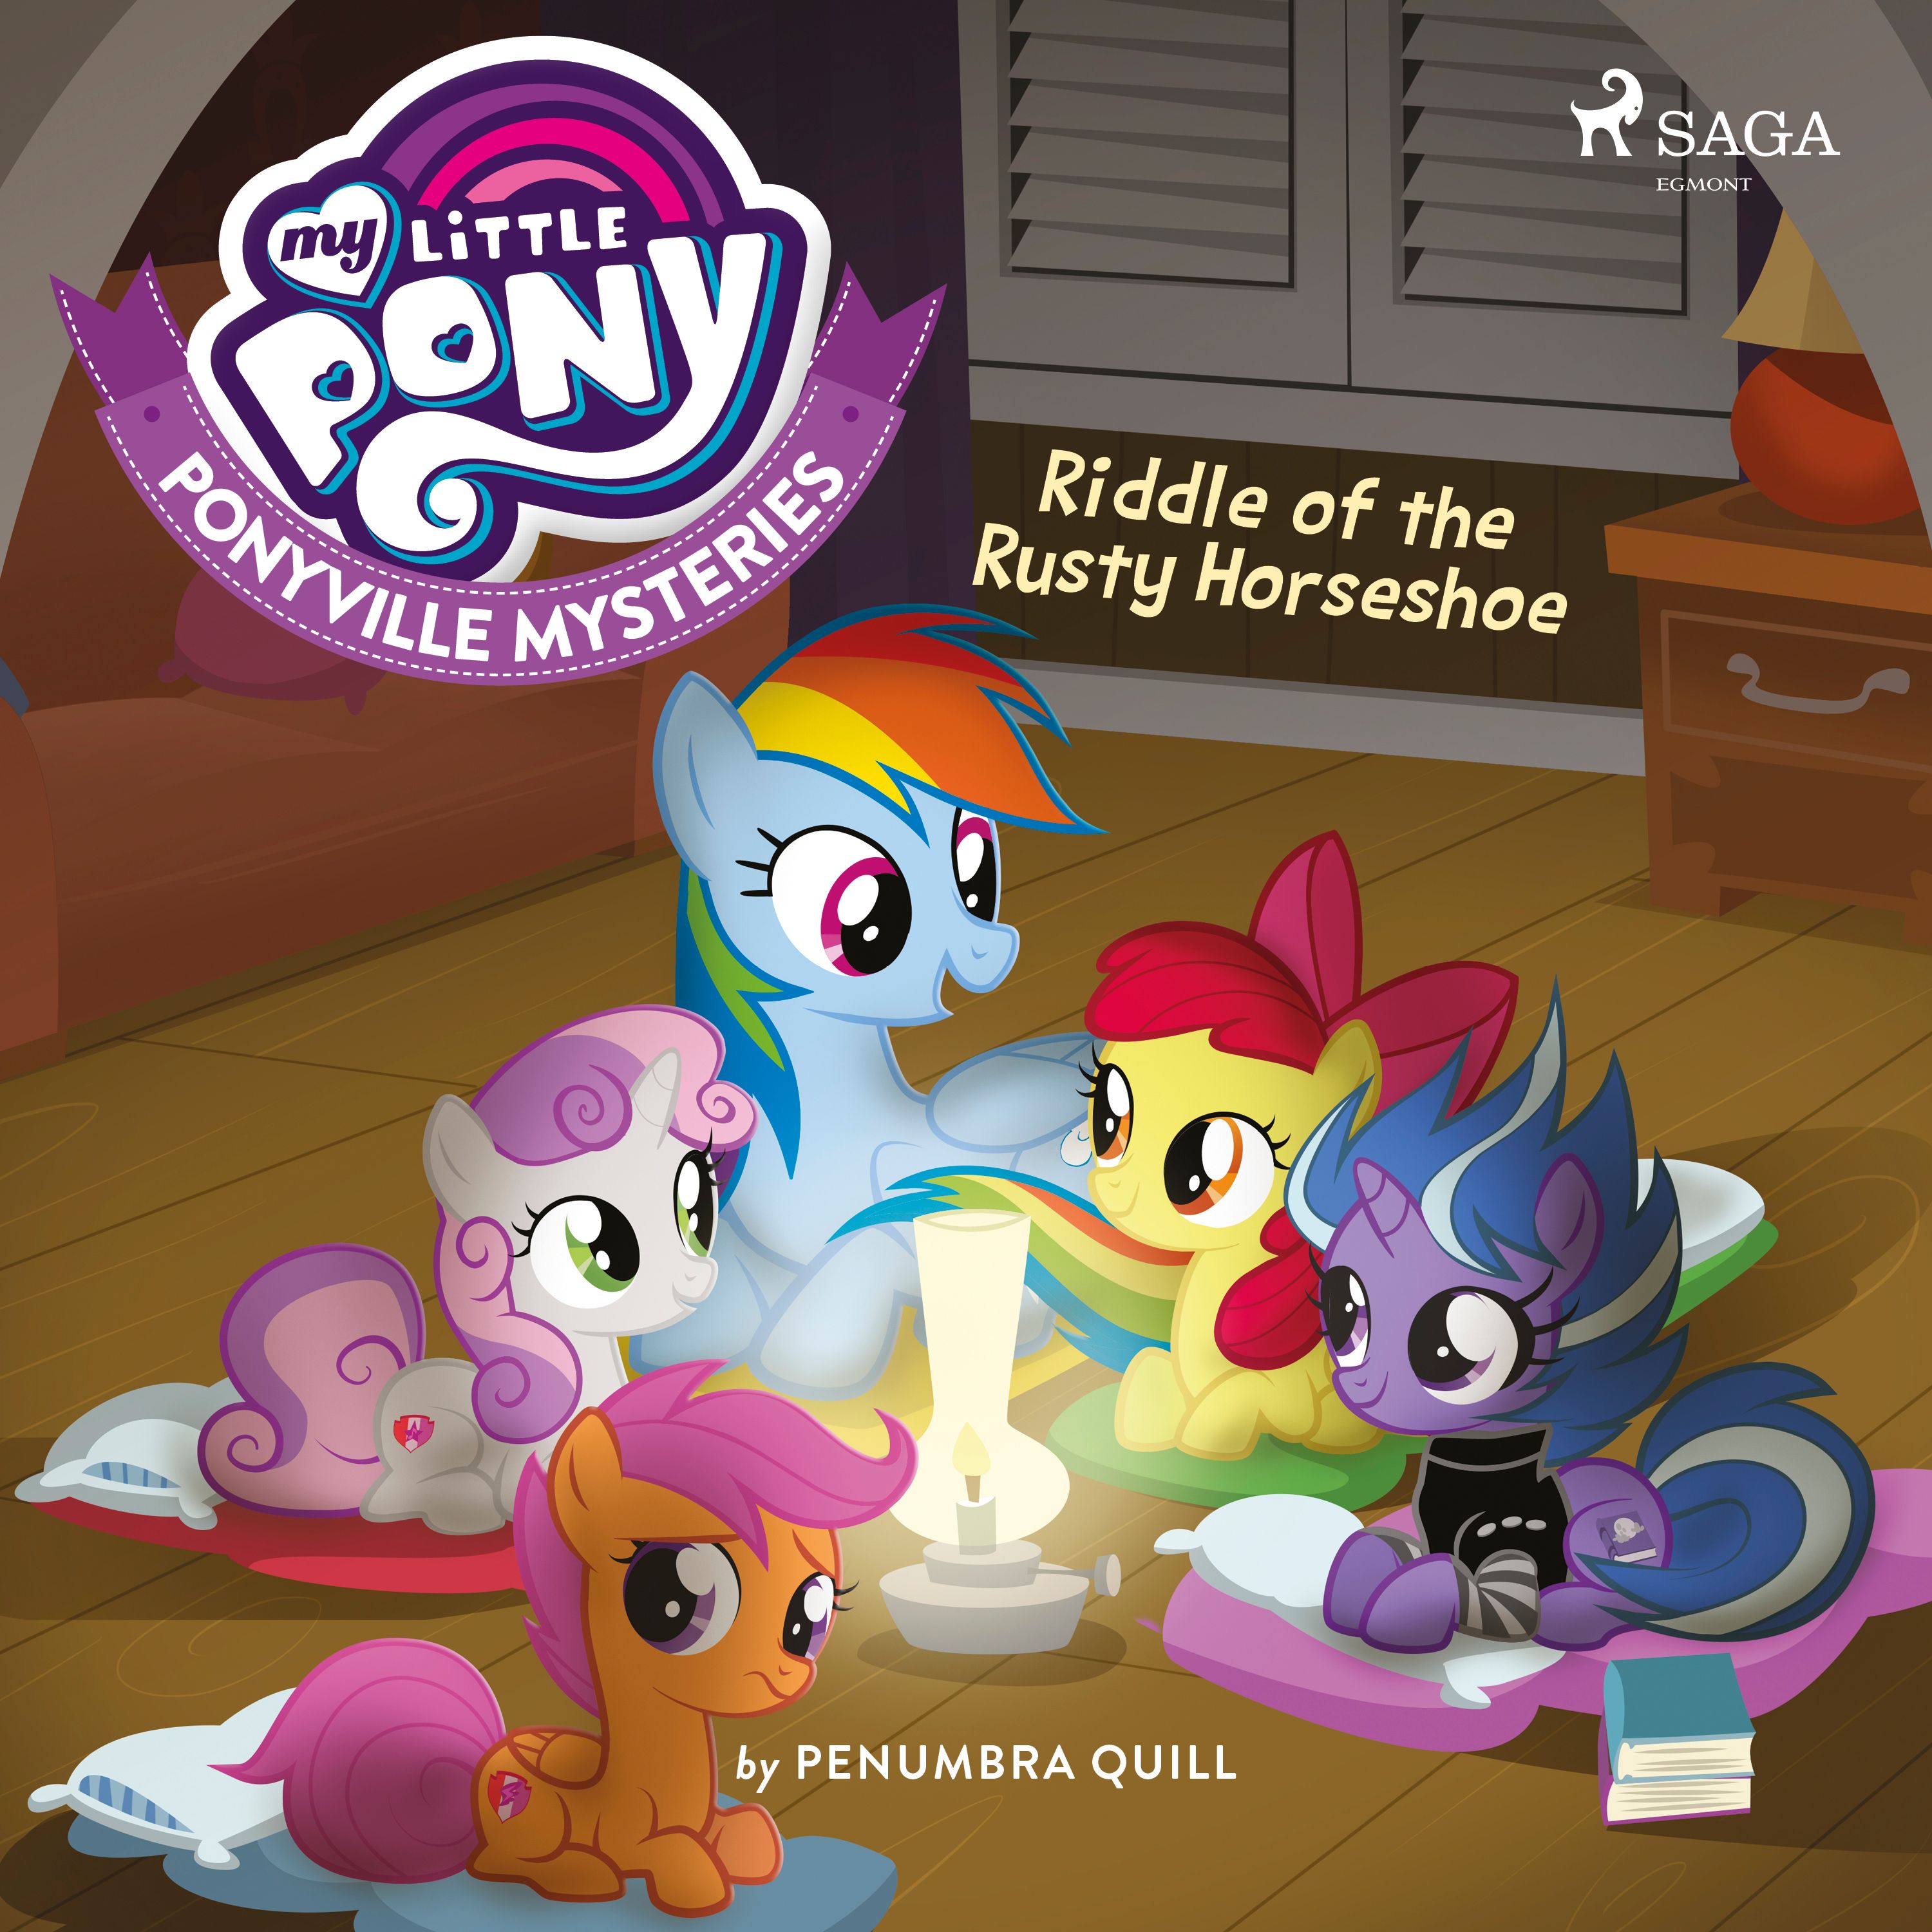 My Little Pony: Ponyville Mysteries: Riddle of the Rusty Horseshoe, lydbog af Penumbra Quill